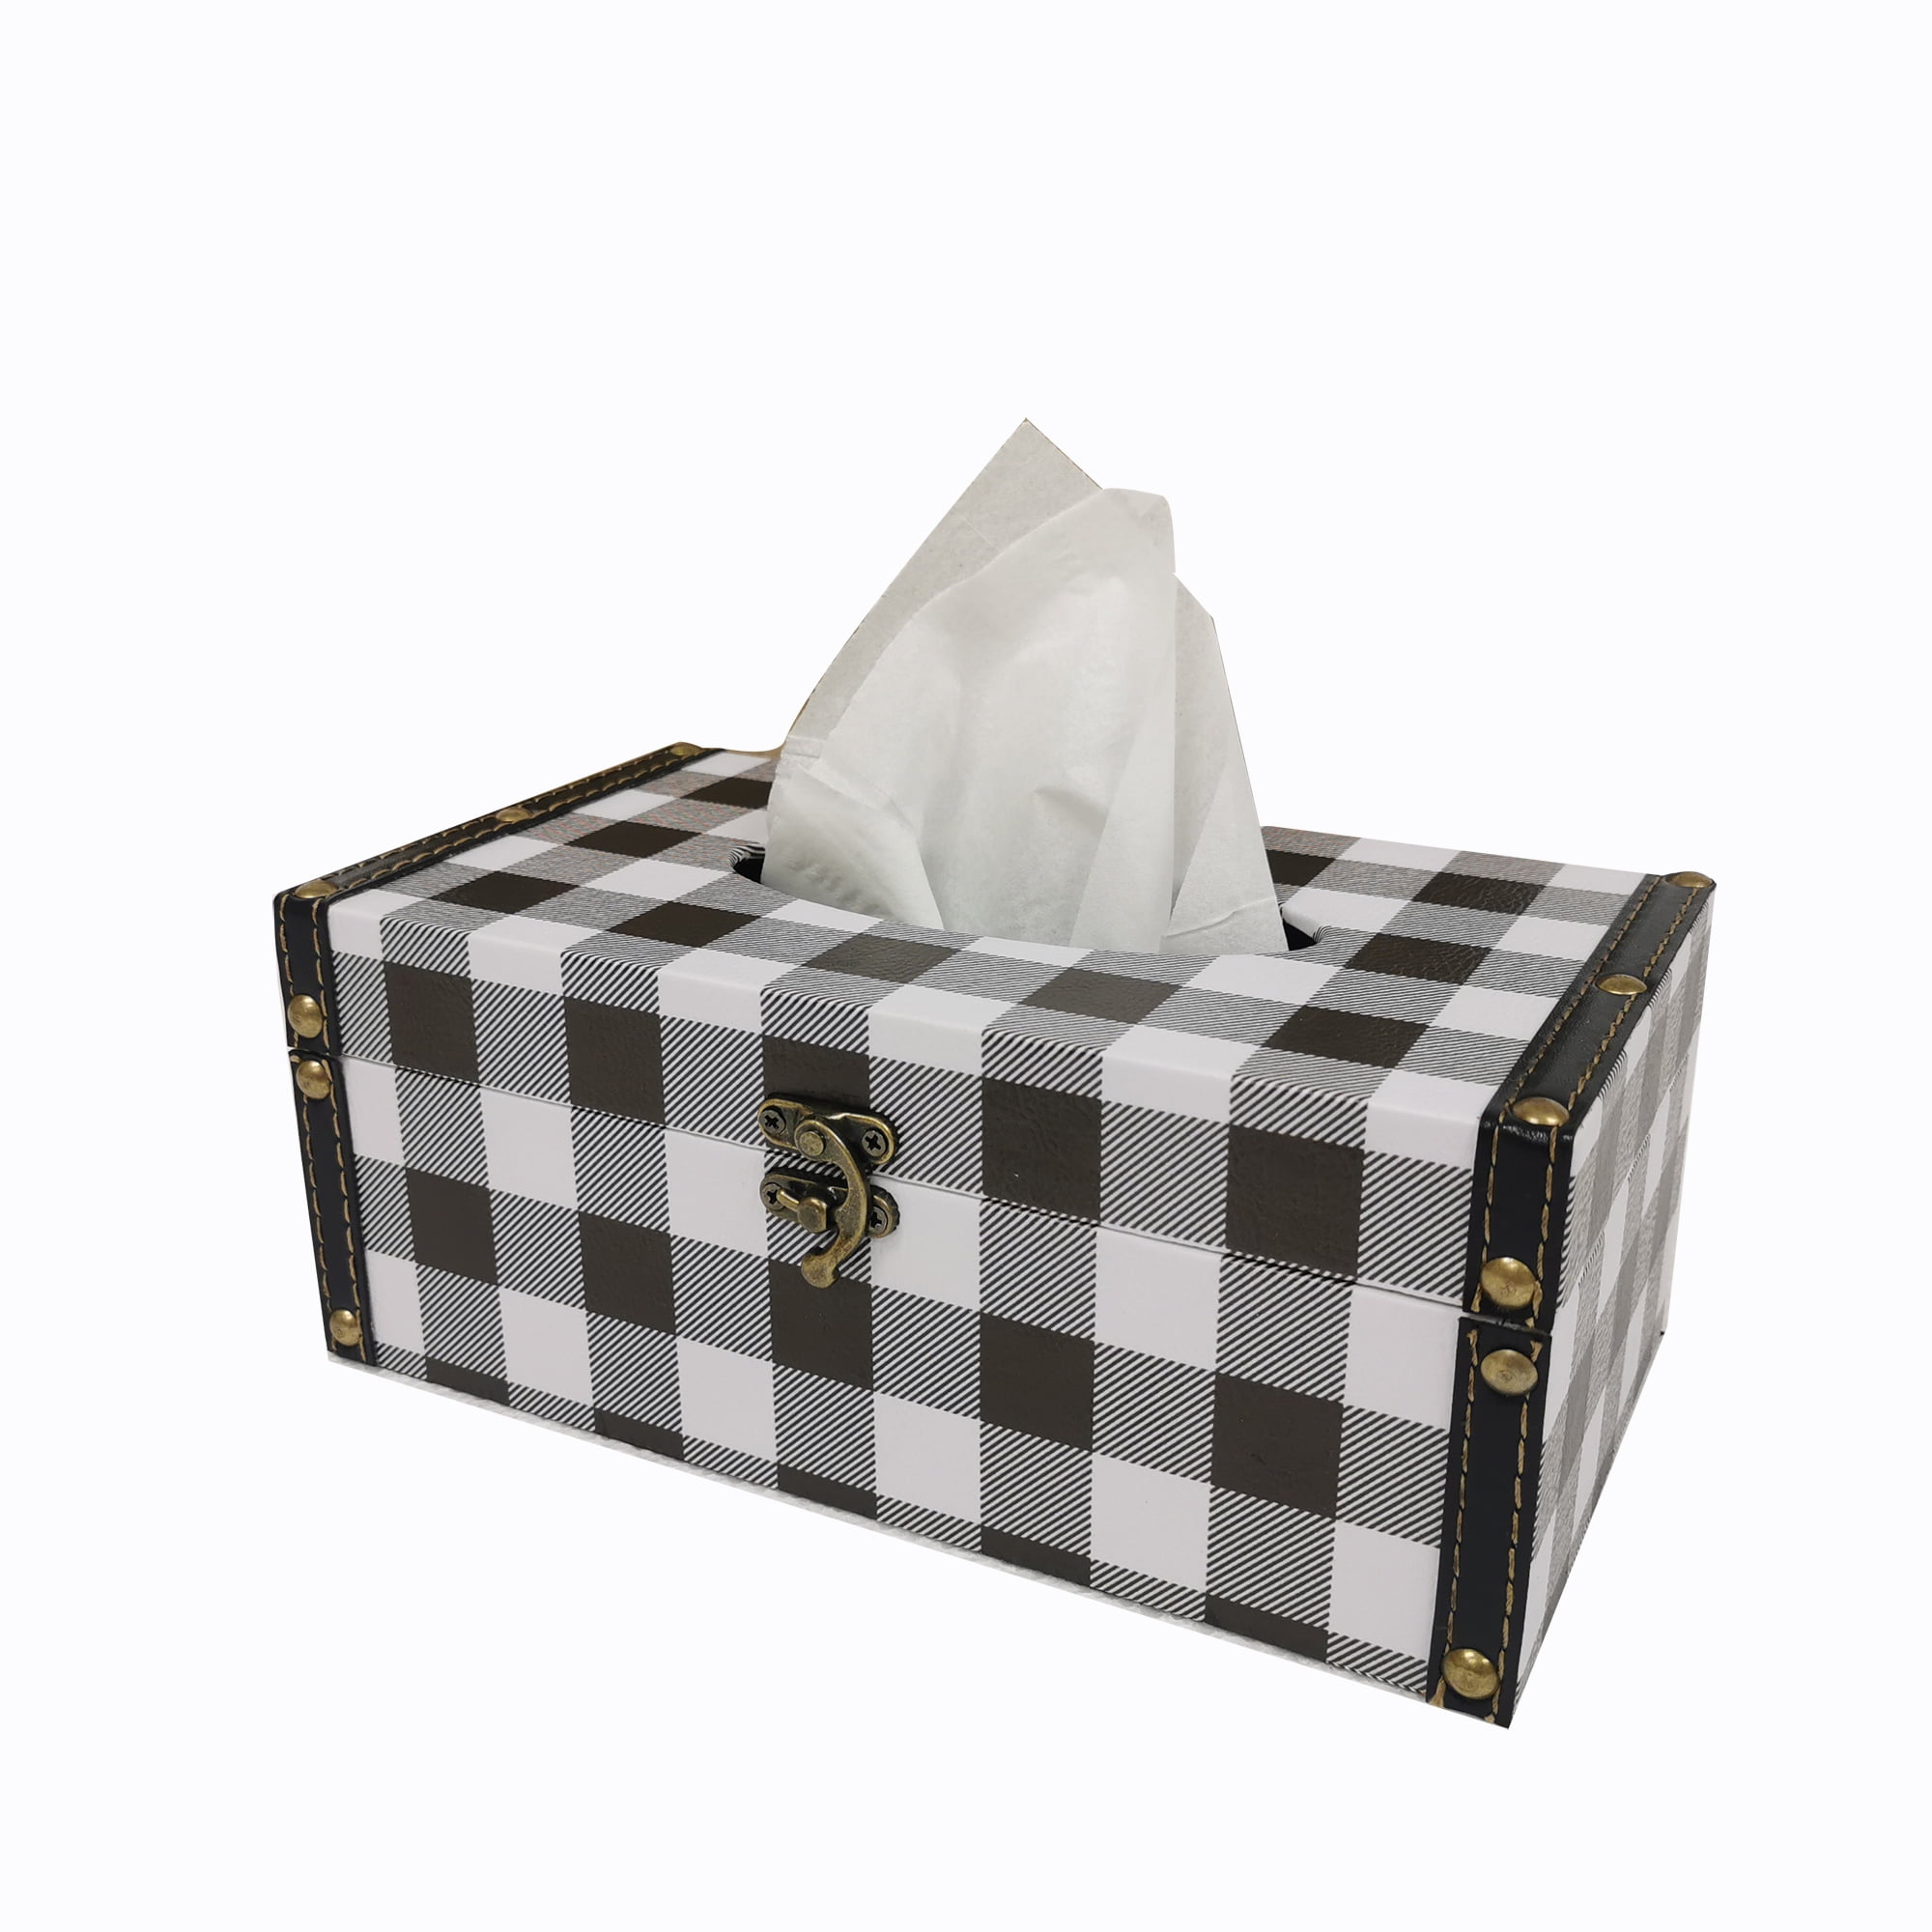 a box of tissues